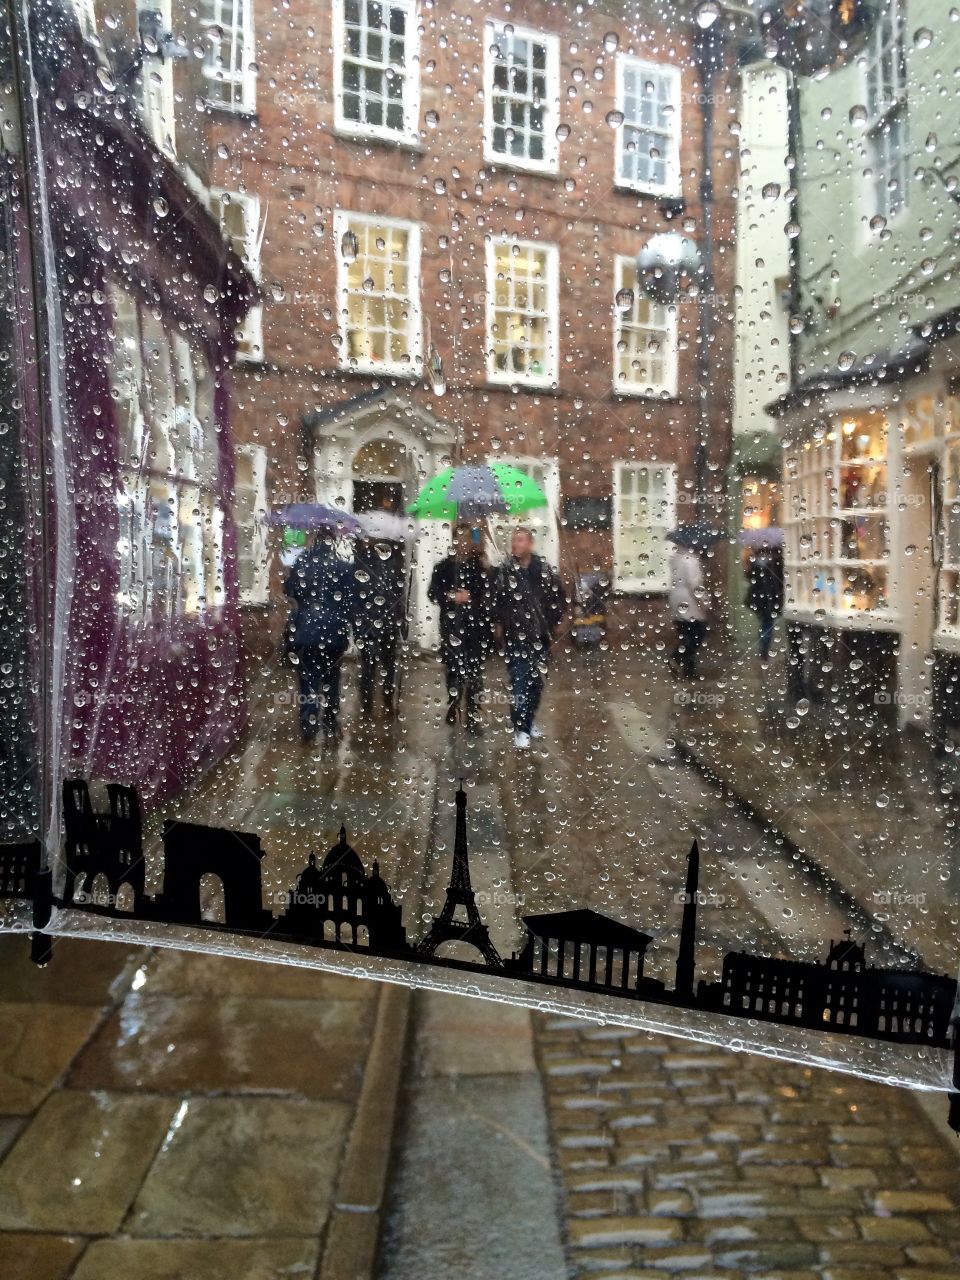 Umbrella View . Looking for a pub round the corner  to shelter from the rain ....